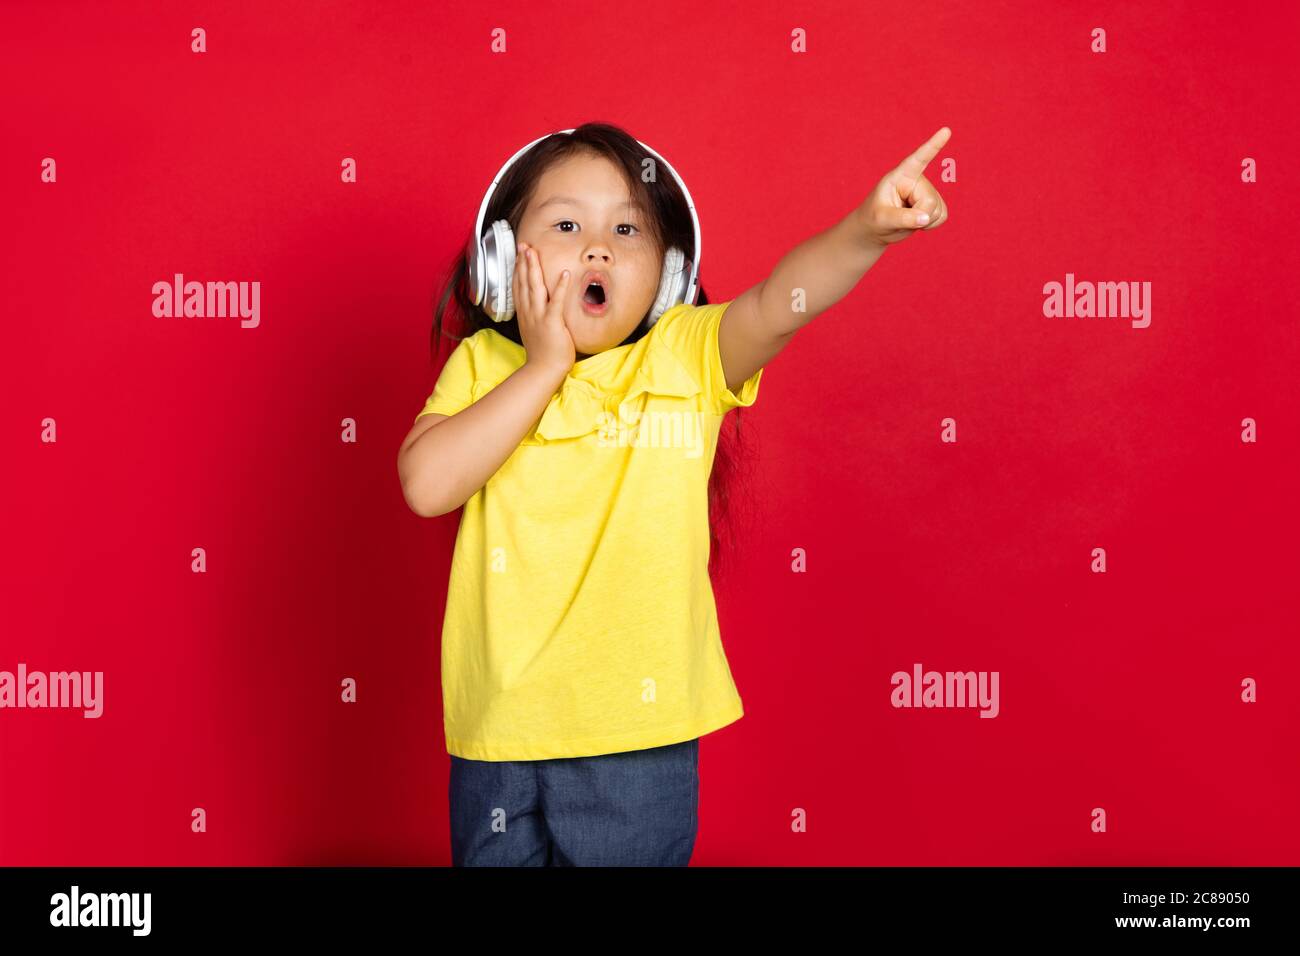 Pointing shocked, wearing headphones. Beautiful little girl on red background. Half-lenght portrait of happy child. Cute asian girl in yellow. Concept of facial expression, human emotions, childhood. Stock Photo